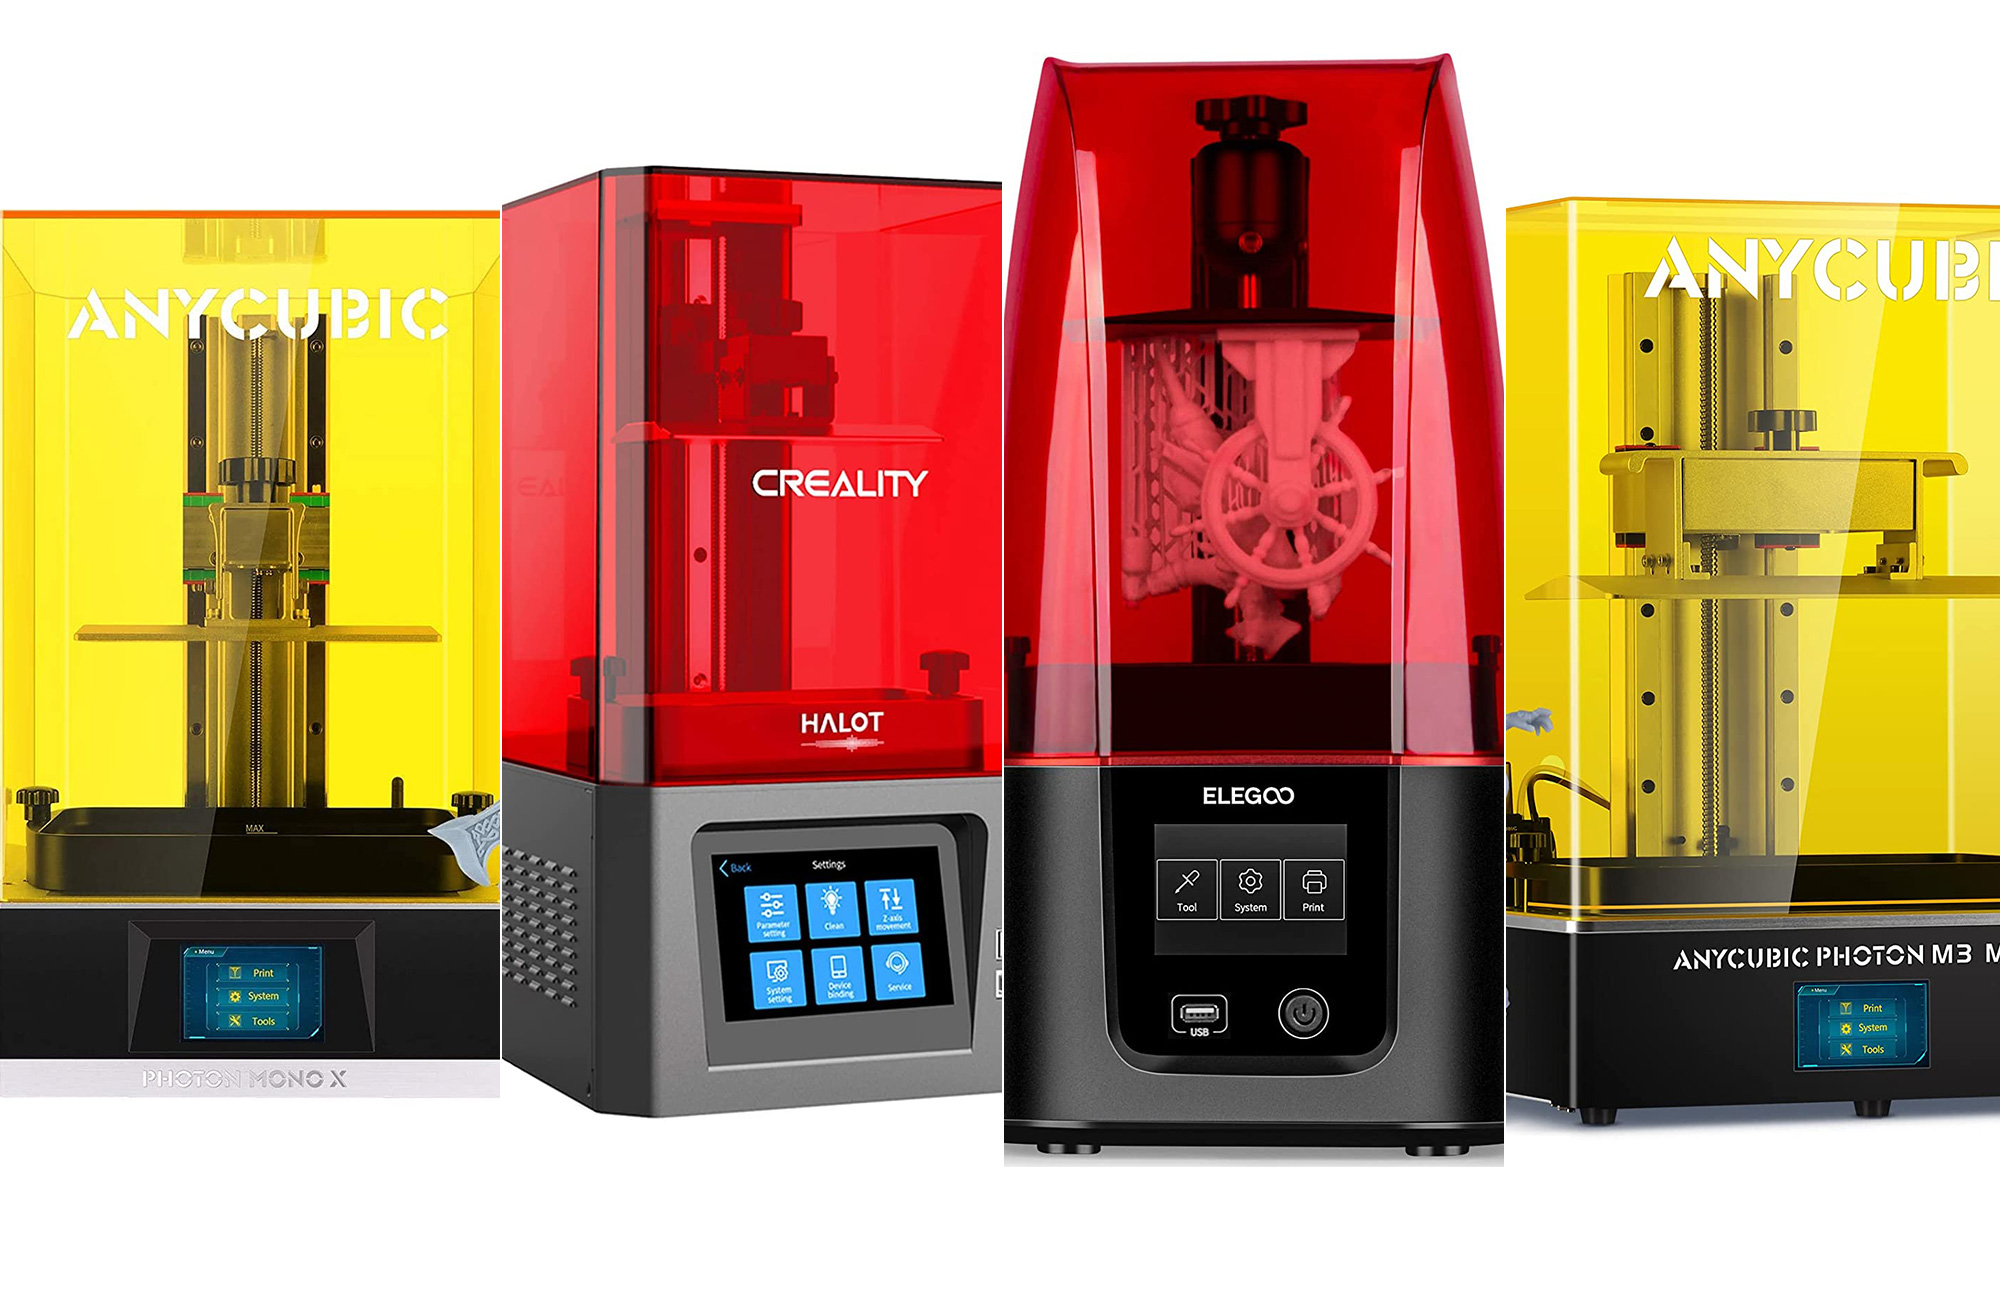 Creality's newest resin 3D printers use new Integral Light Source  technology for better prints - The Gadgeteer